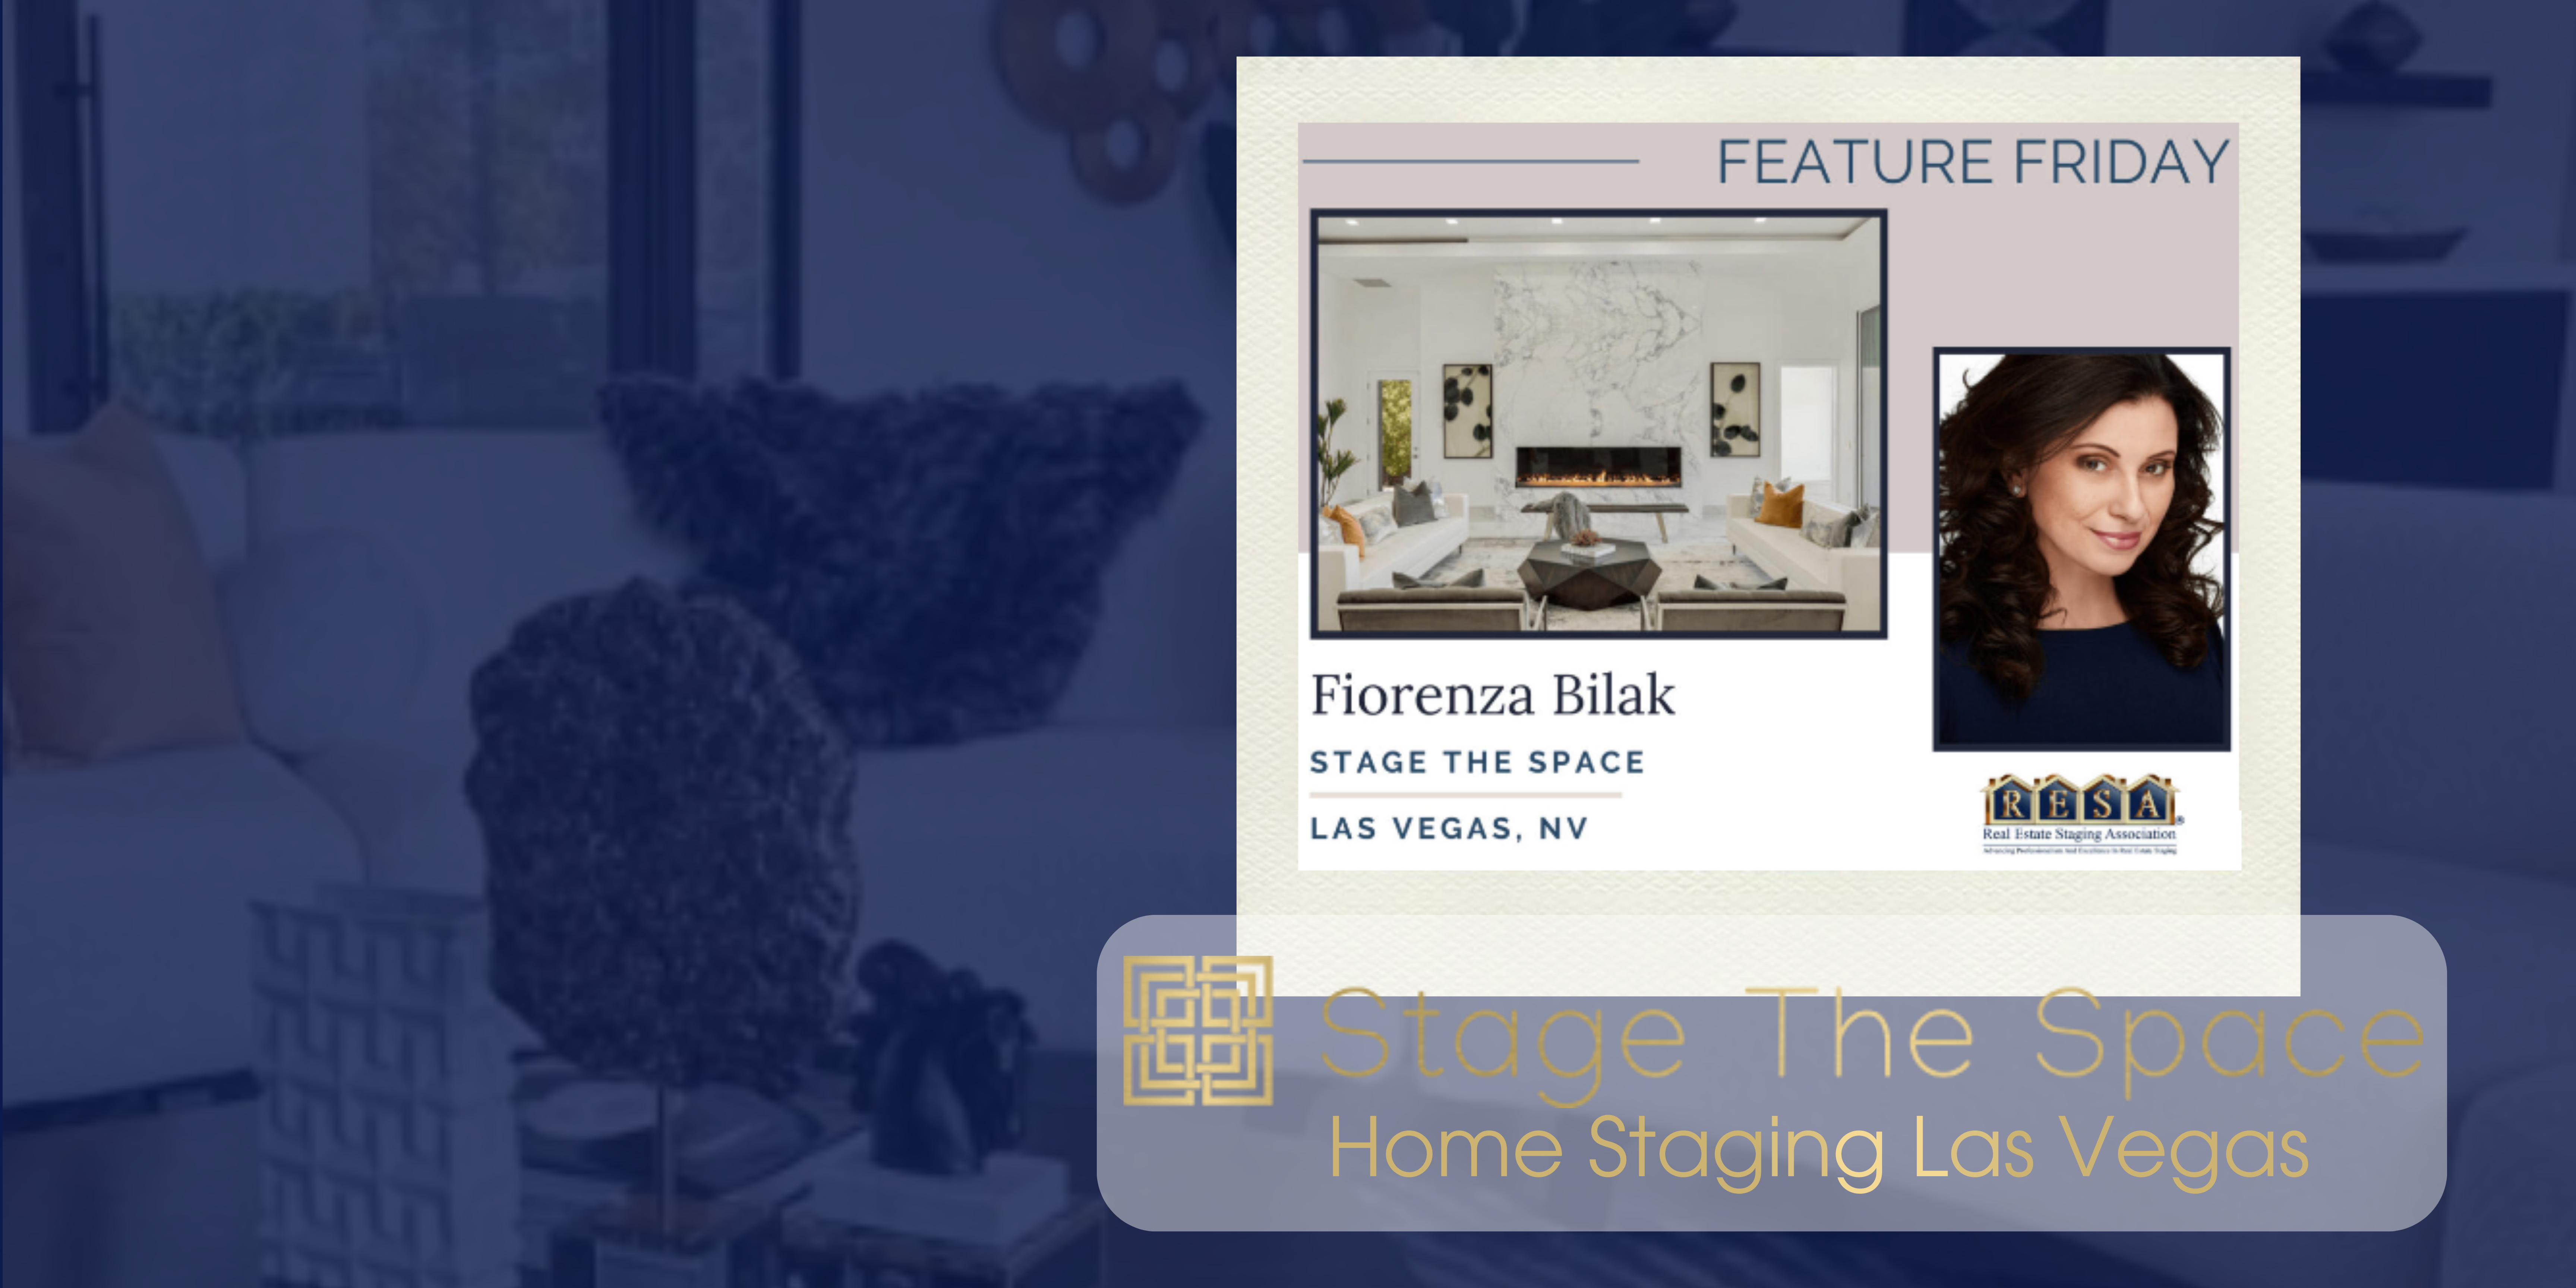 Home Staging, Stage The Space, Interview, Feature Friday, HomeStaging Newswire